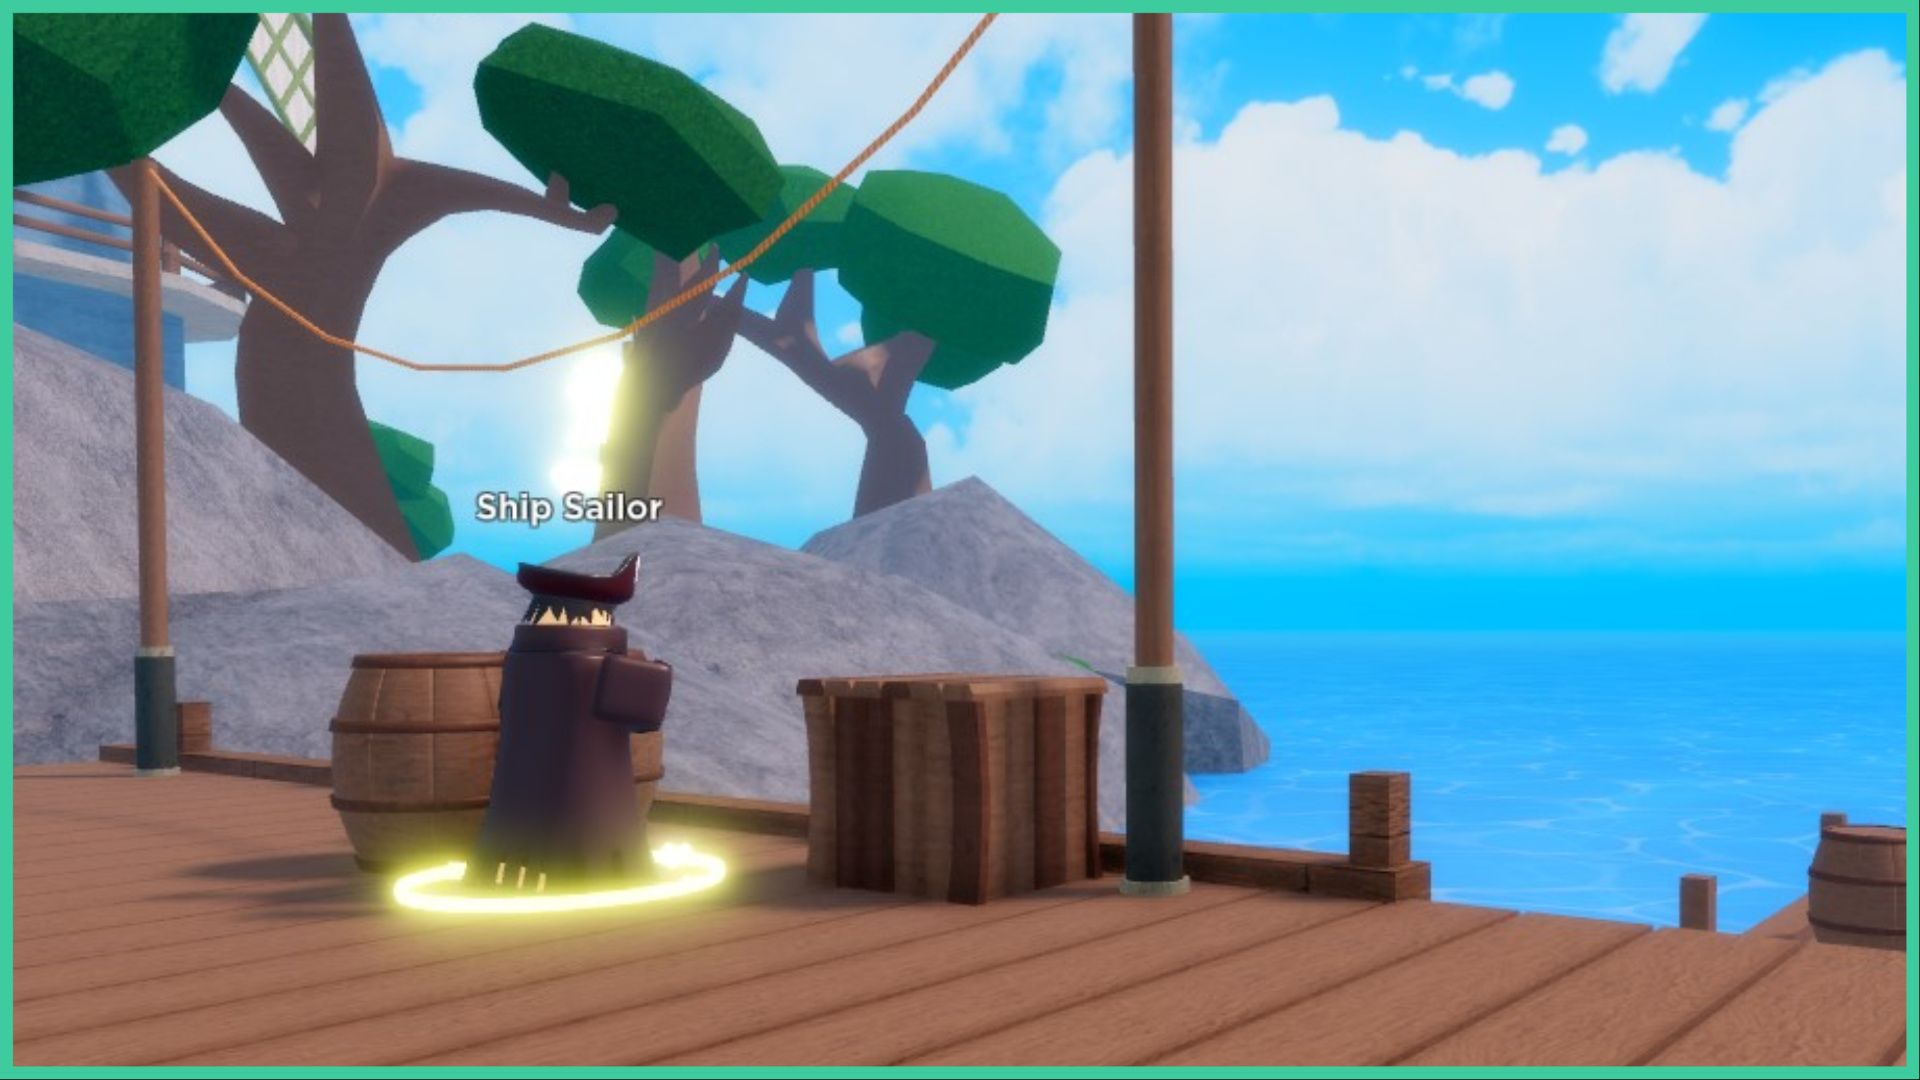 feature image for our legacy piece npc locations guide, it's a screenshot of the ship sailor NPC as he stands on the wooden dock, overlooking the ocean, with a blue lighthouse hidden behind some trees, the NPC has a golden circle around his feet and a golden exclamation mark above him, as he wears a pirate hat and long coat, standing next to a wooden crate and two barrels